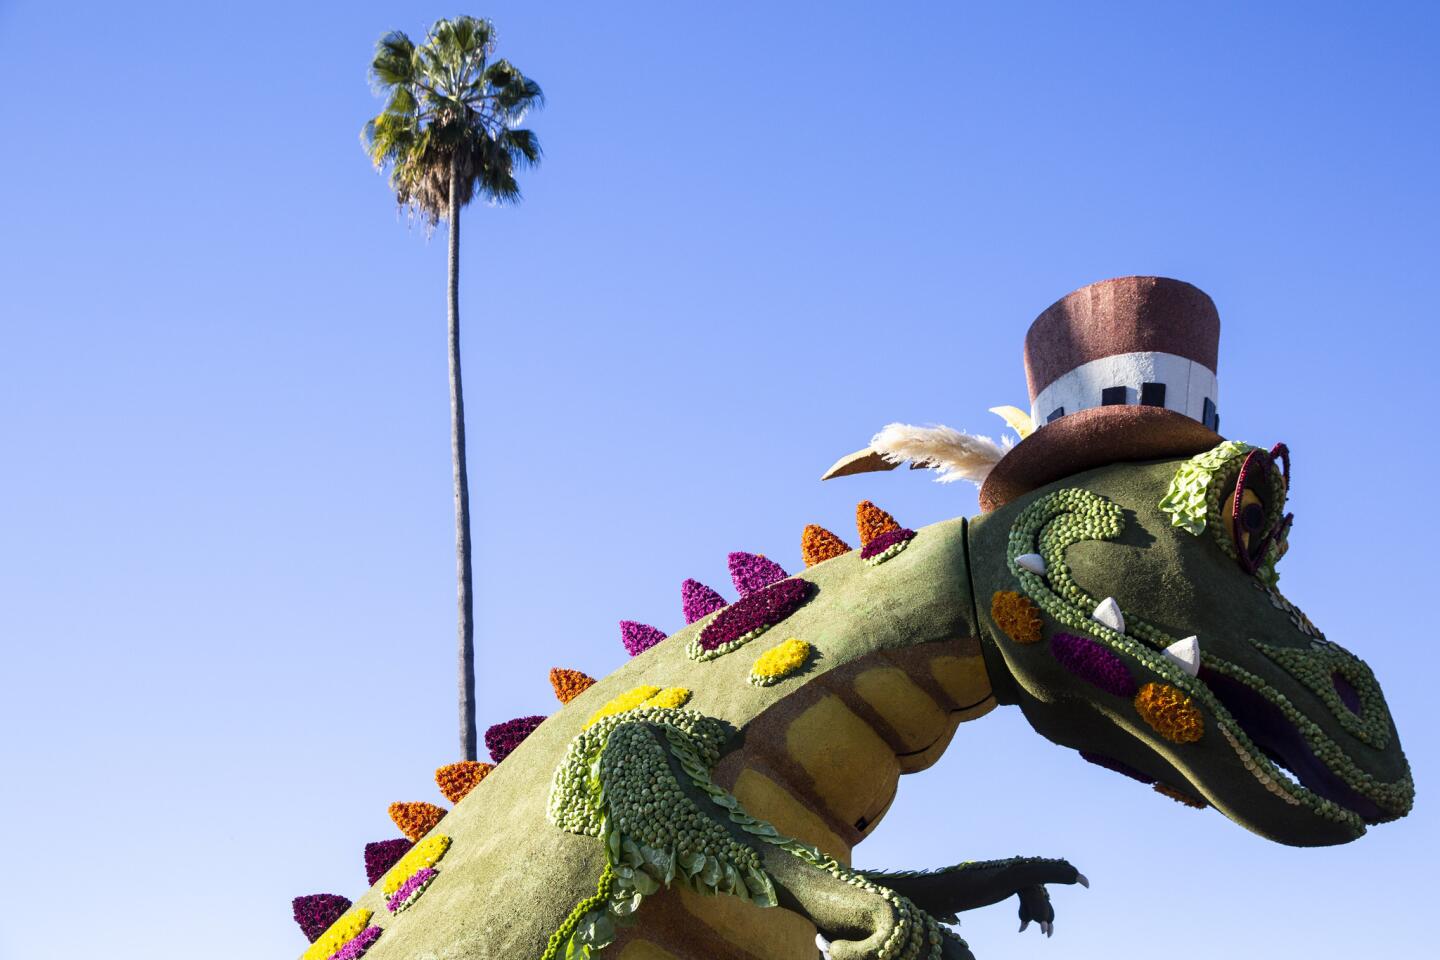 "Service Rocks" was by the Rotary Rose Parade Float Committee and included a towering crocodile.